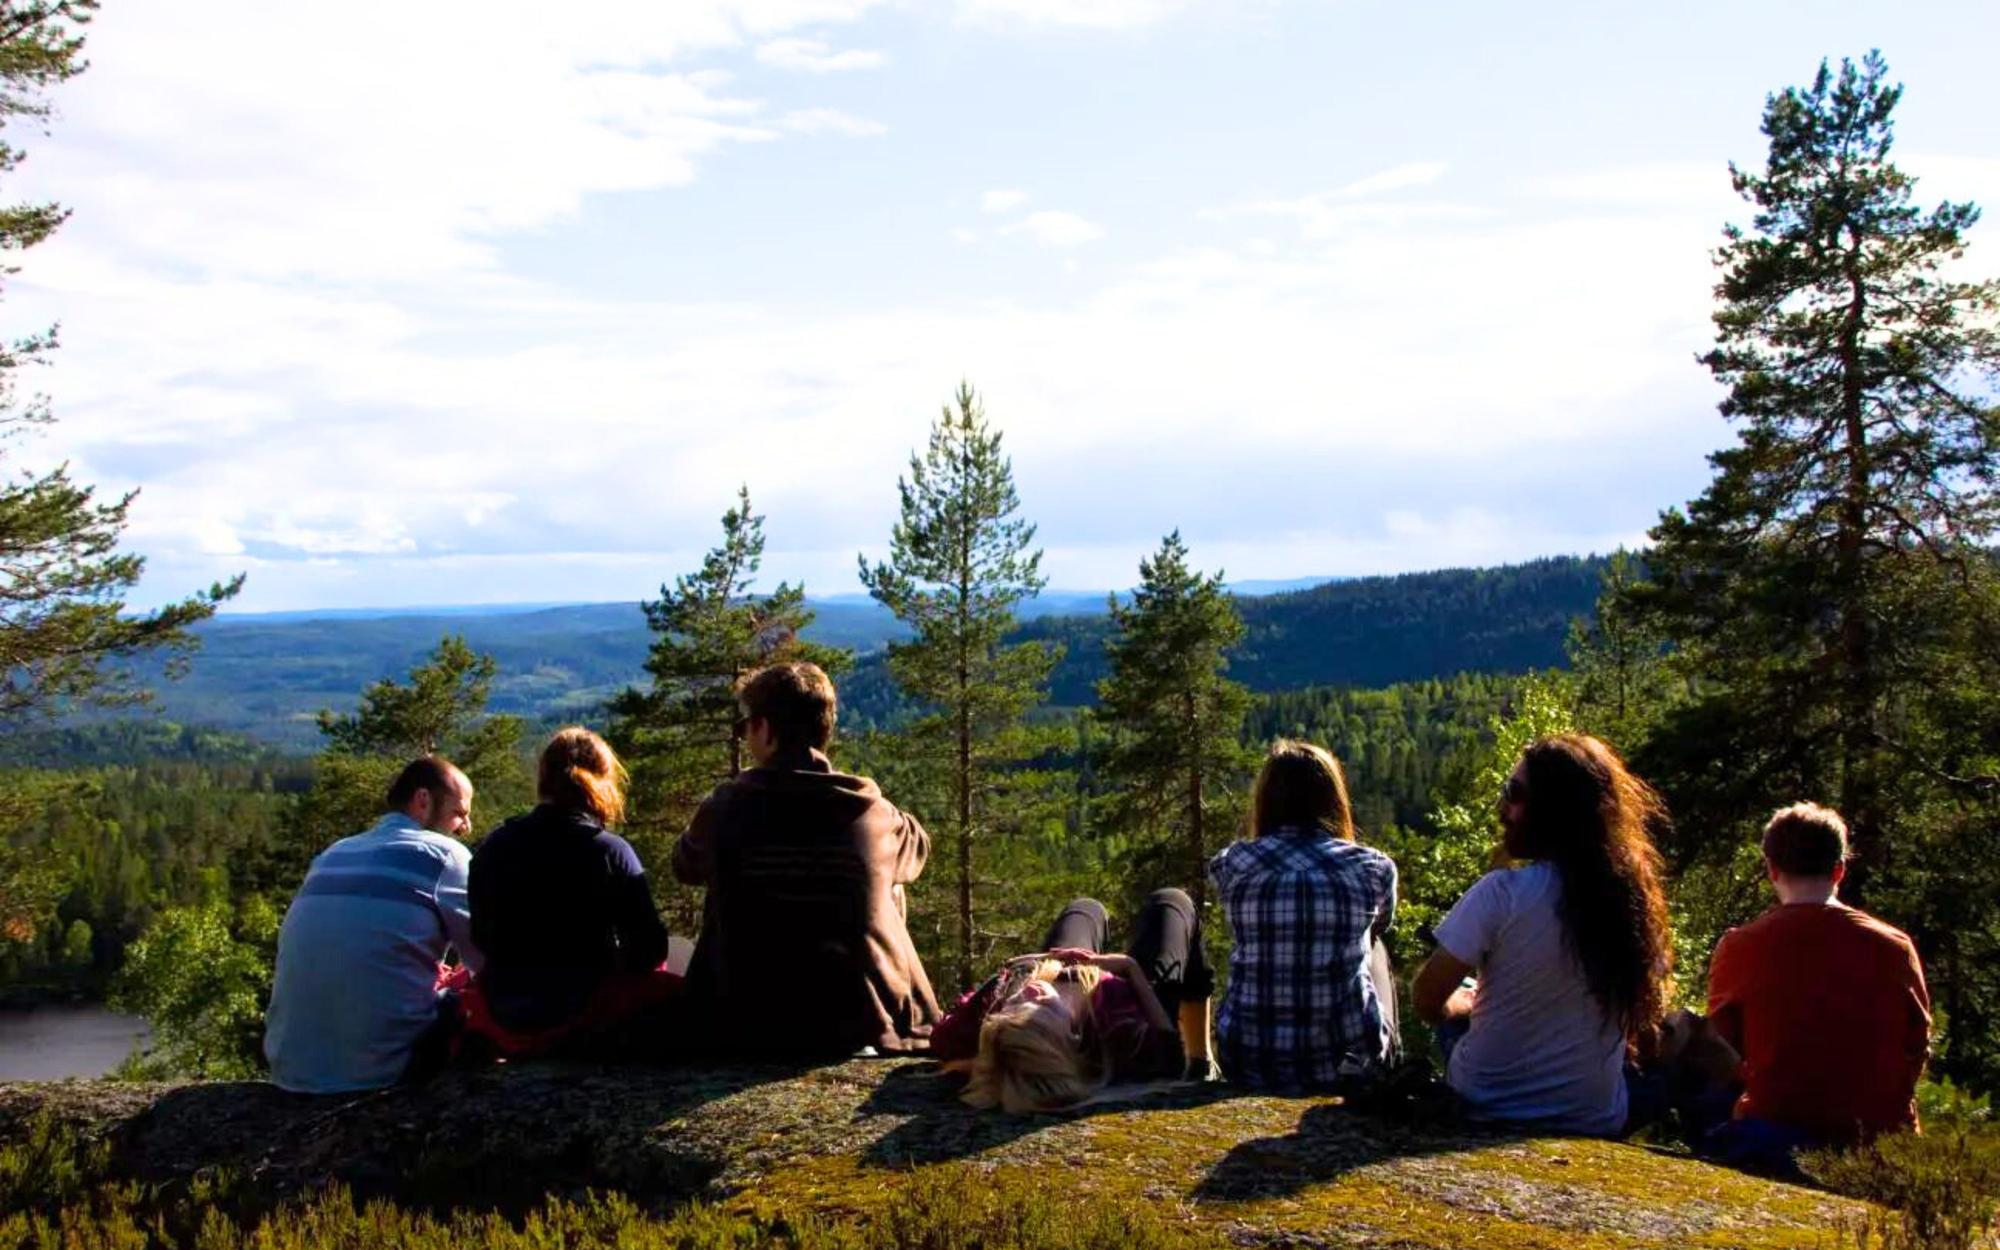 A group of people are sitting on a rock overlooking a forest.